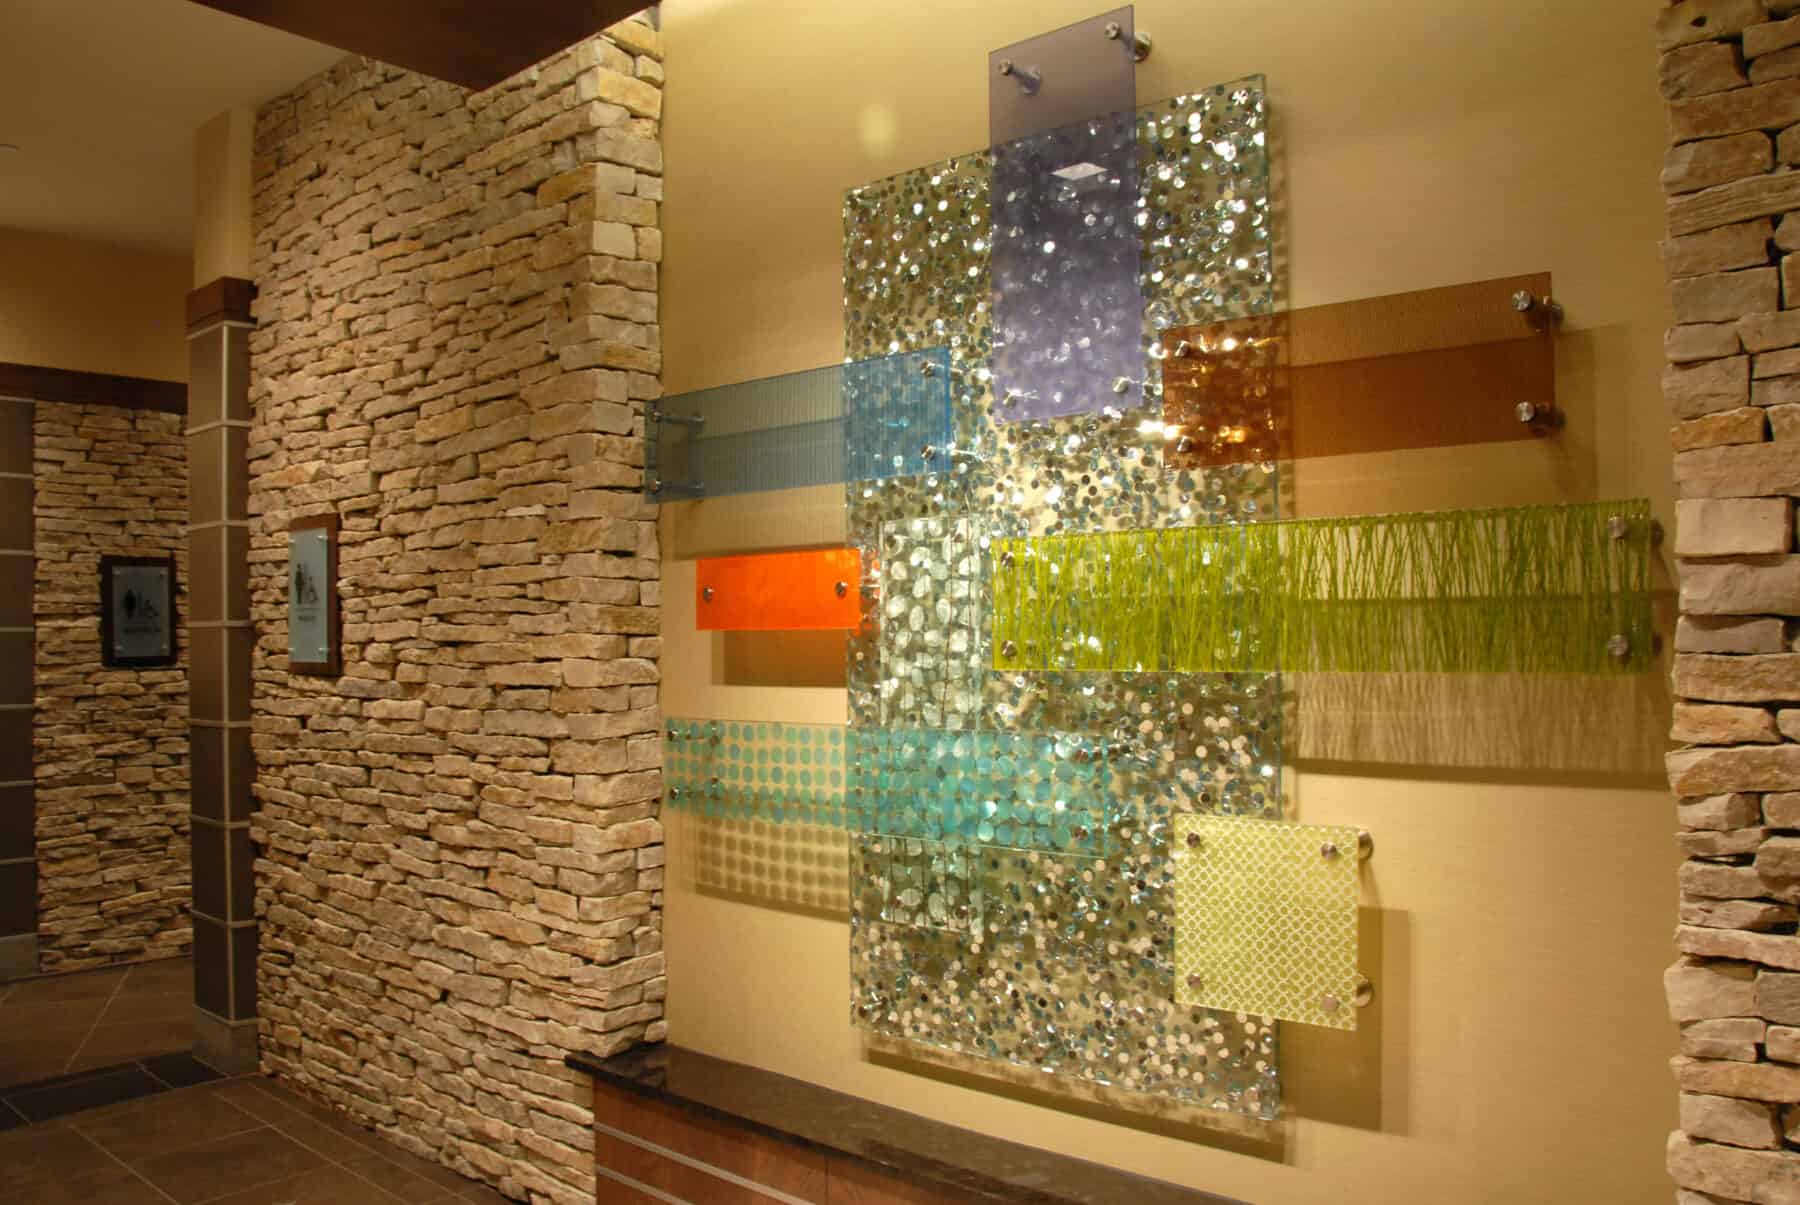 Custom Fabrication of Intricate Architectural Art Glass Panels Installed with Special Hardware for Construction Specialty Projects by Commercial Builder & General Contractor Structural Enterprises